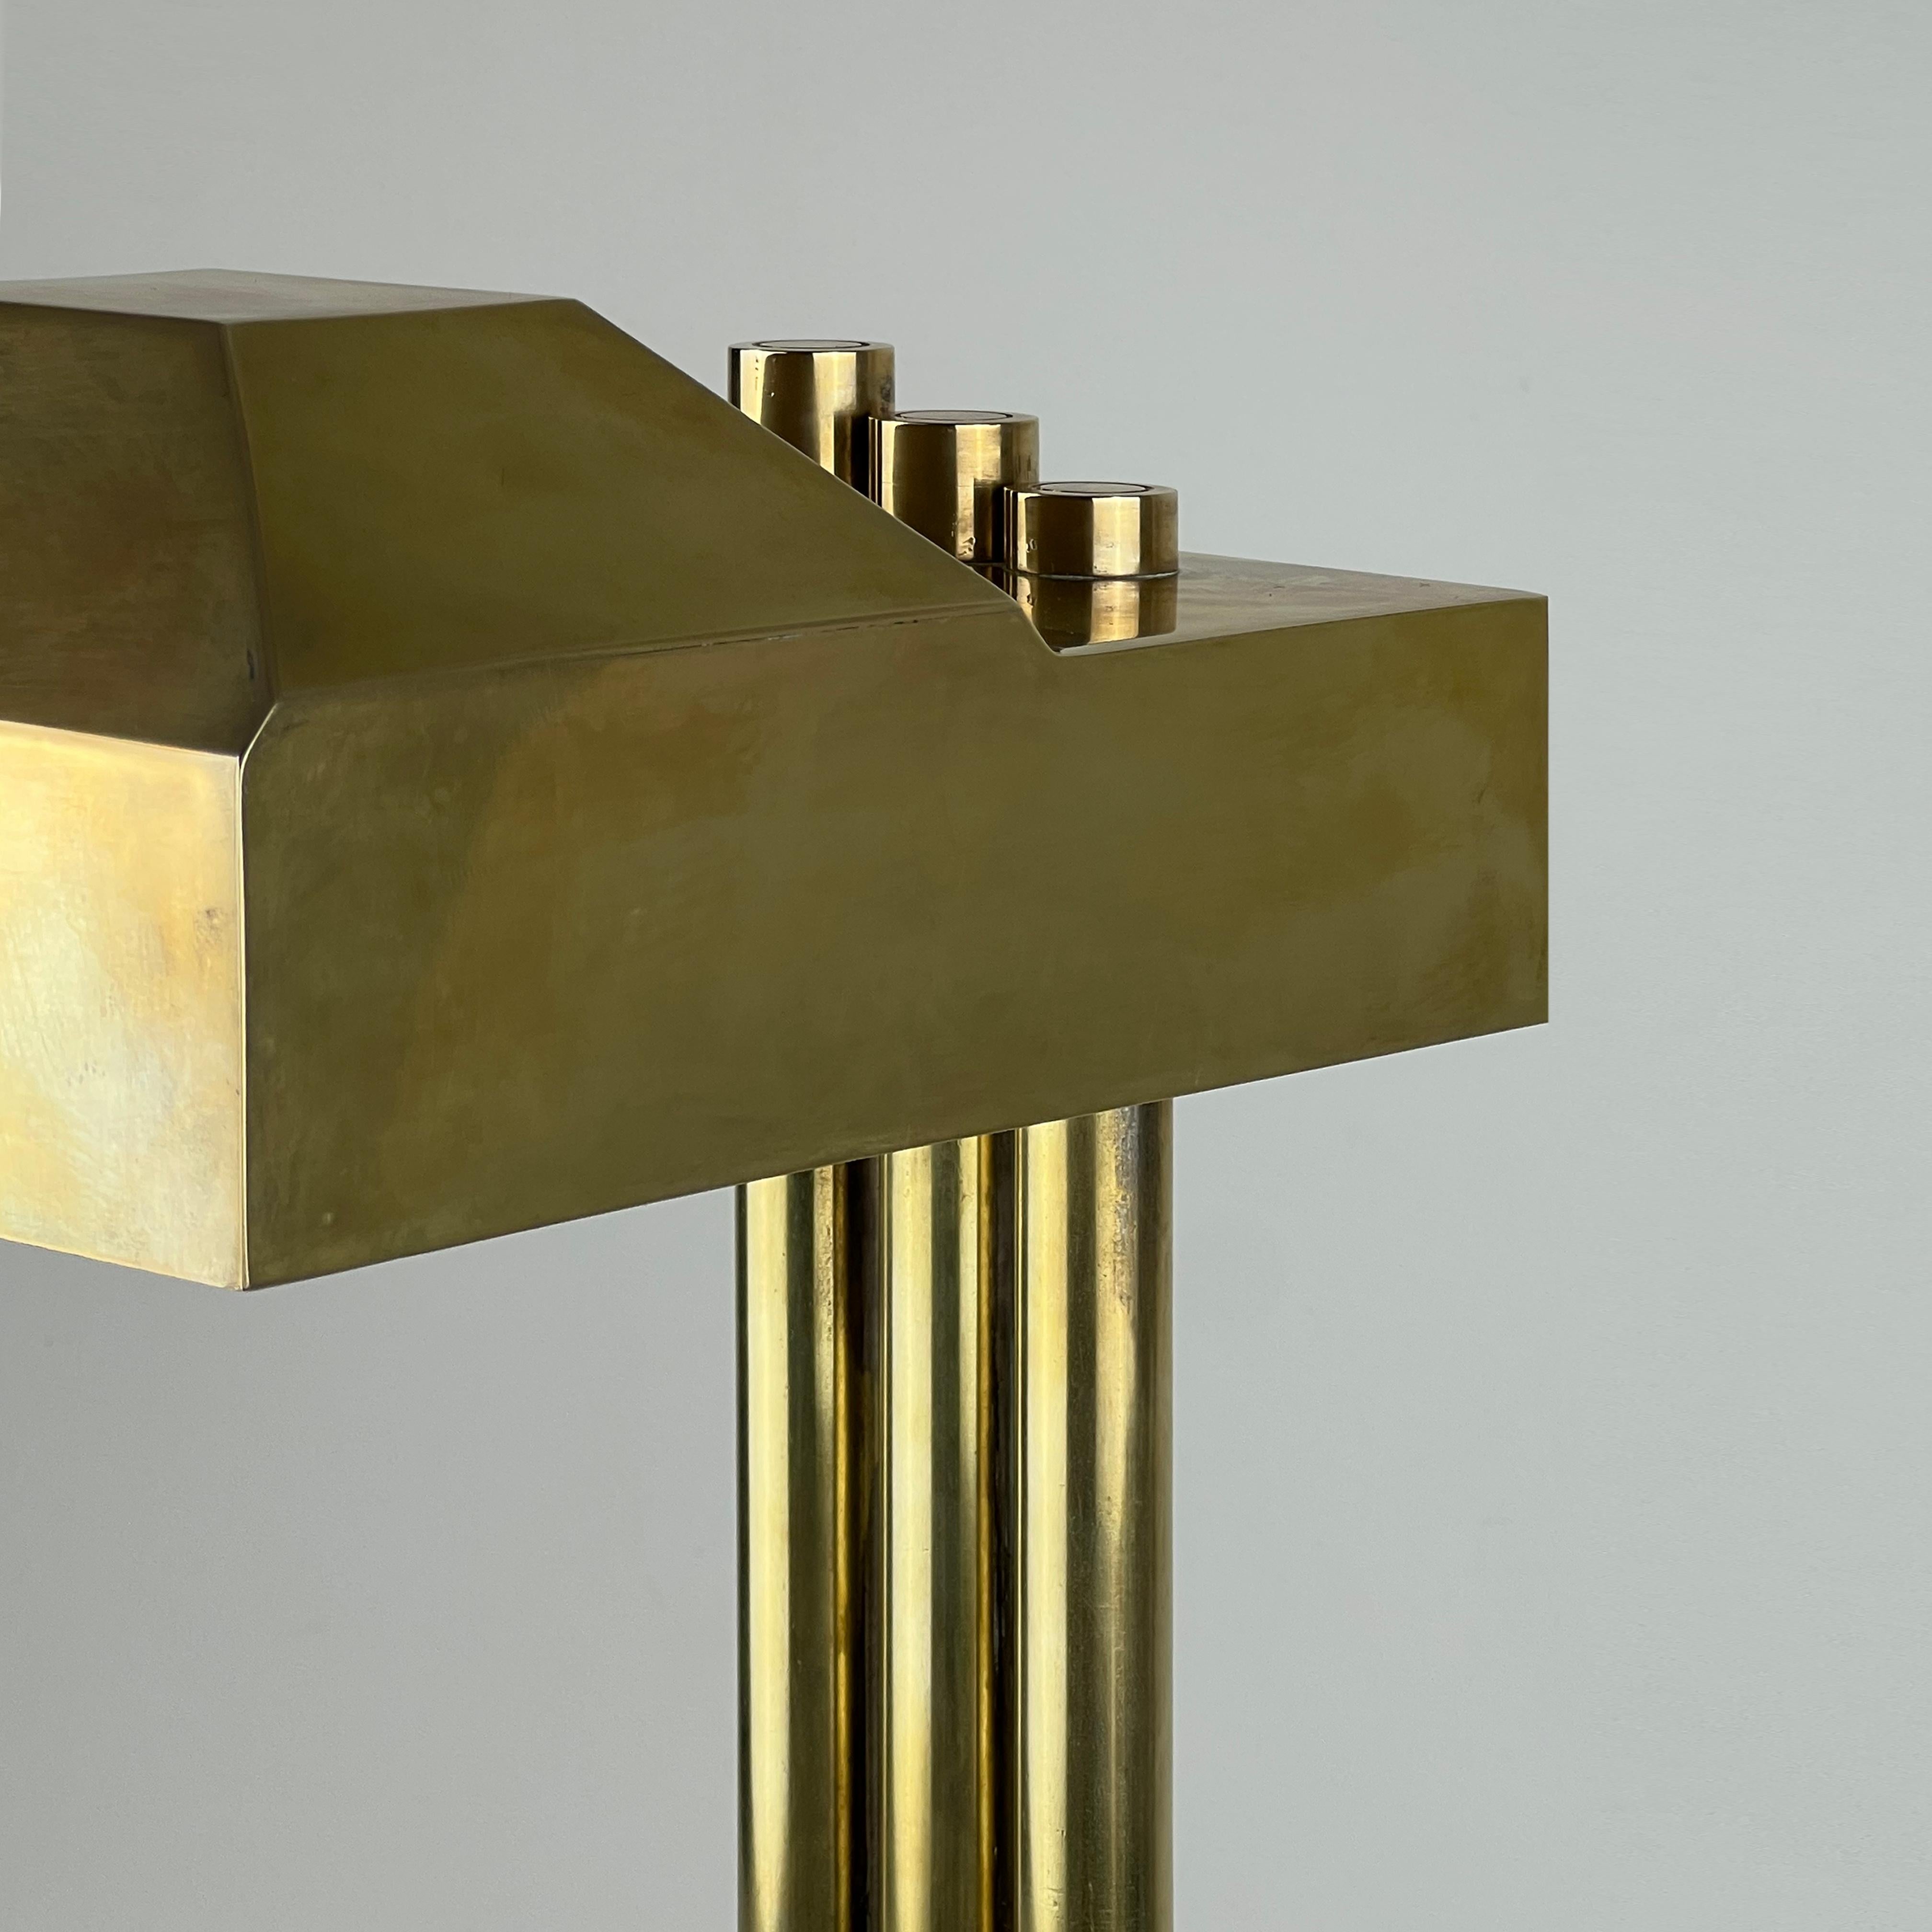 Bauhaus Brass Table Lamp by Marcel Breuer, 1925, Marked